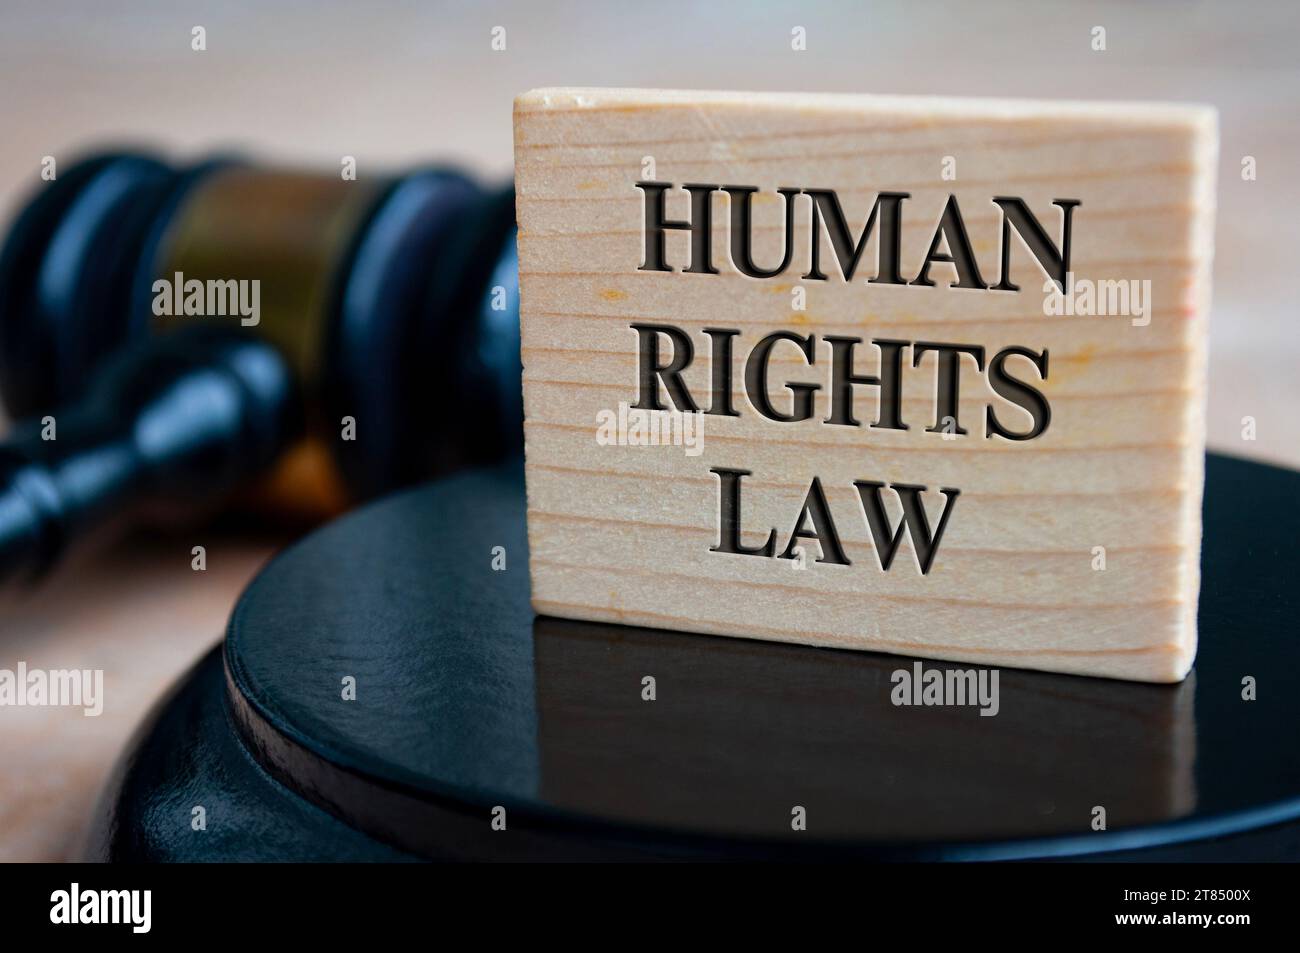 Human Rights Law text engraved on wooden block with gavel background. Legal concept Stock Photo